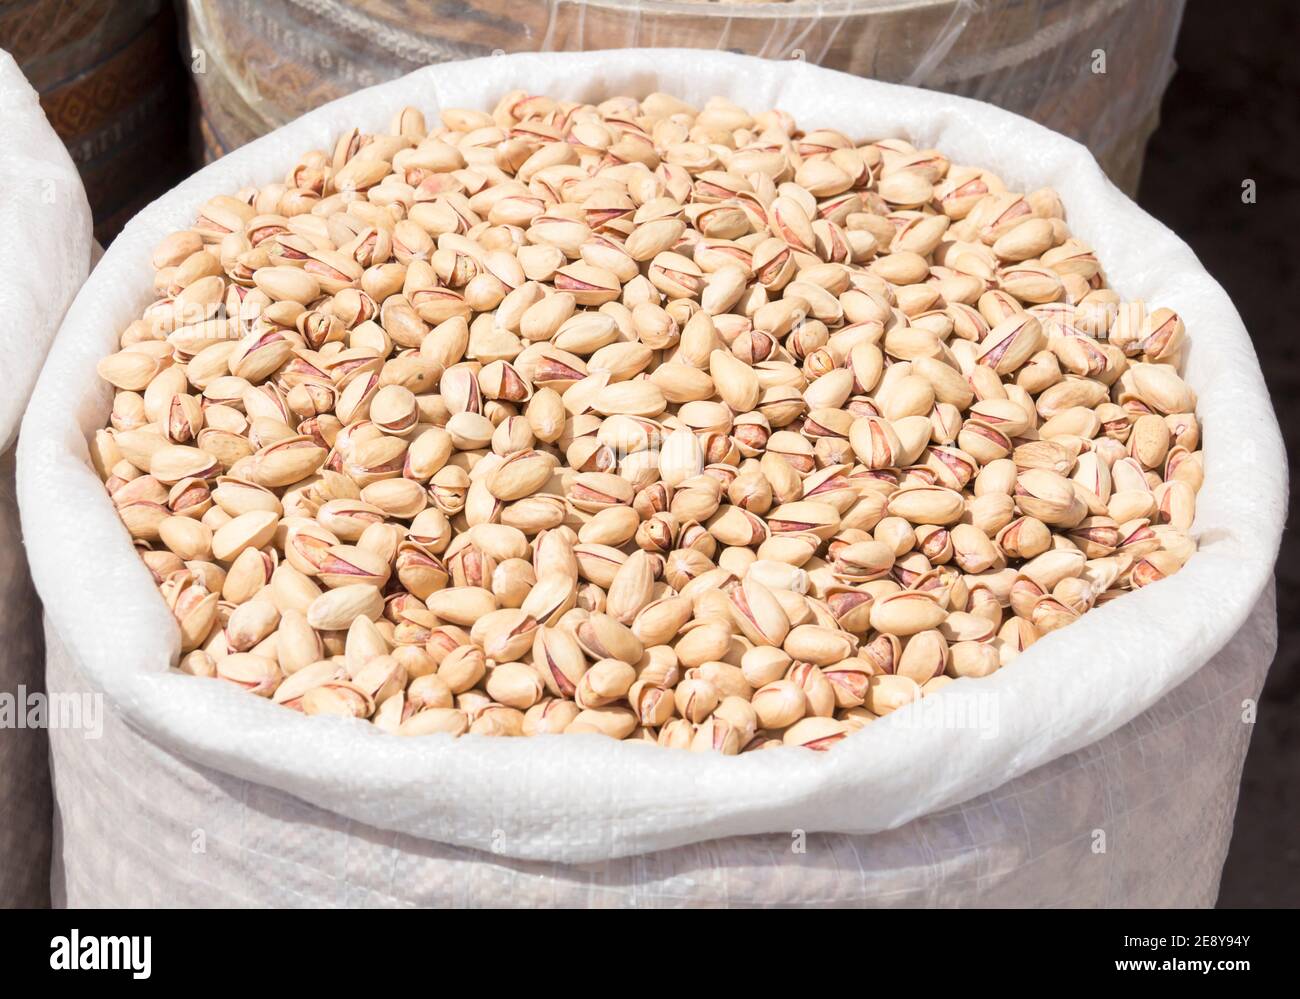 Close up of sack of fresh pistachios. Stock Photo